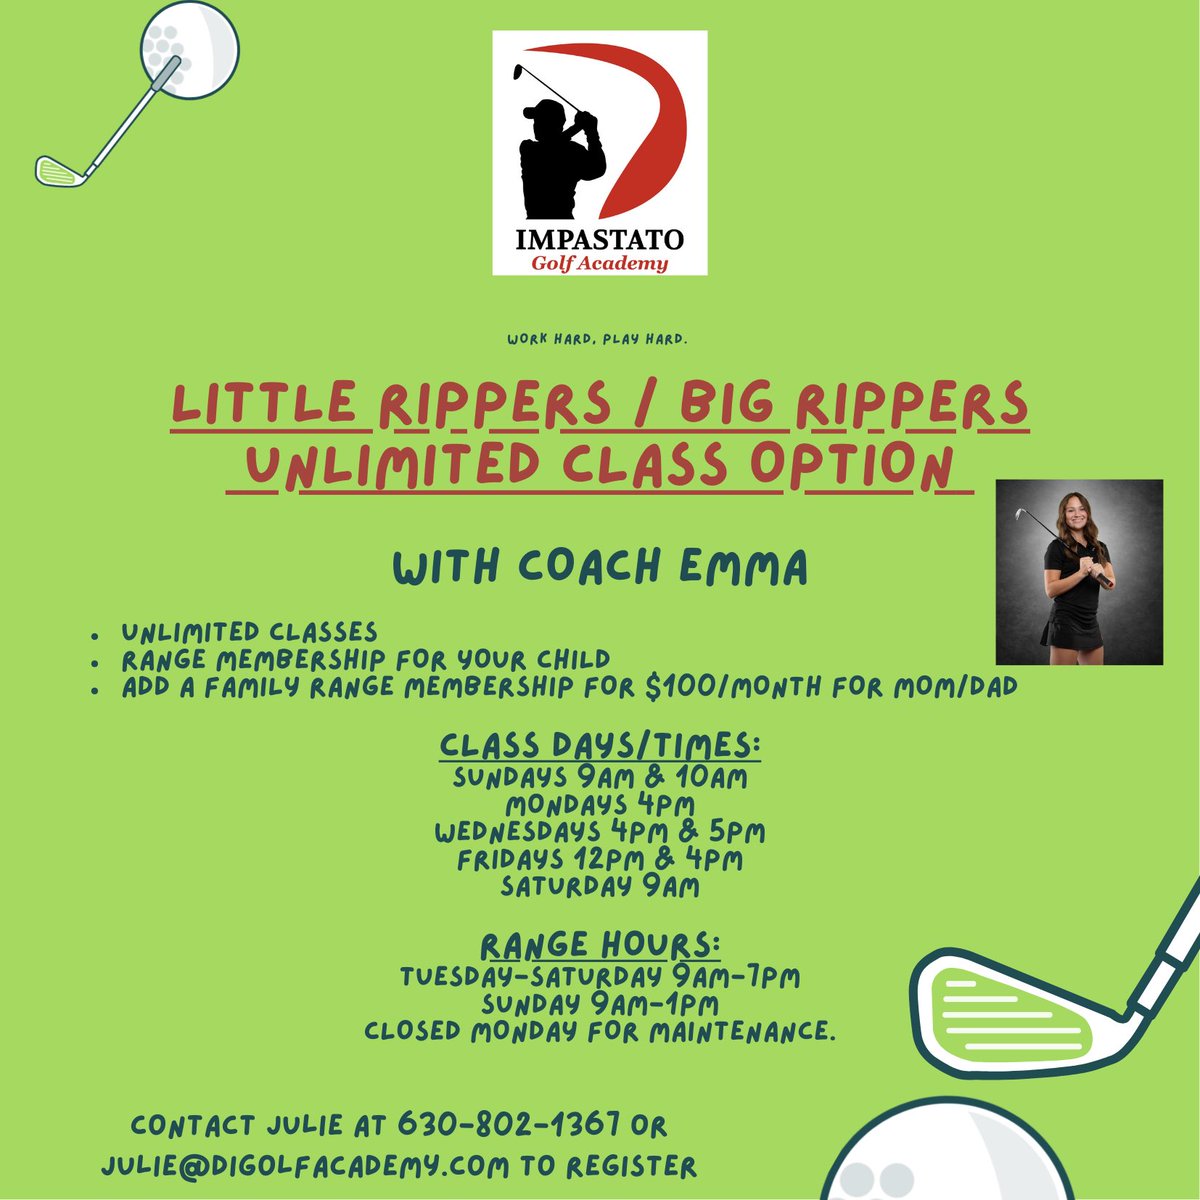 Little Rippers and Big Rippers.  Unlimited Summer Class Schedule.  @dimpastato1 @PGAJrLeague #juniorgolf #golfcamps